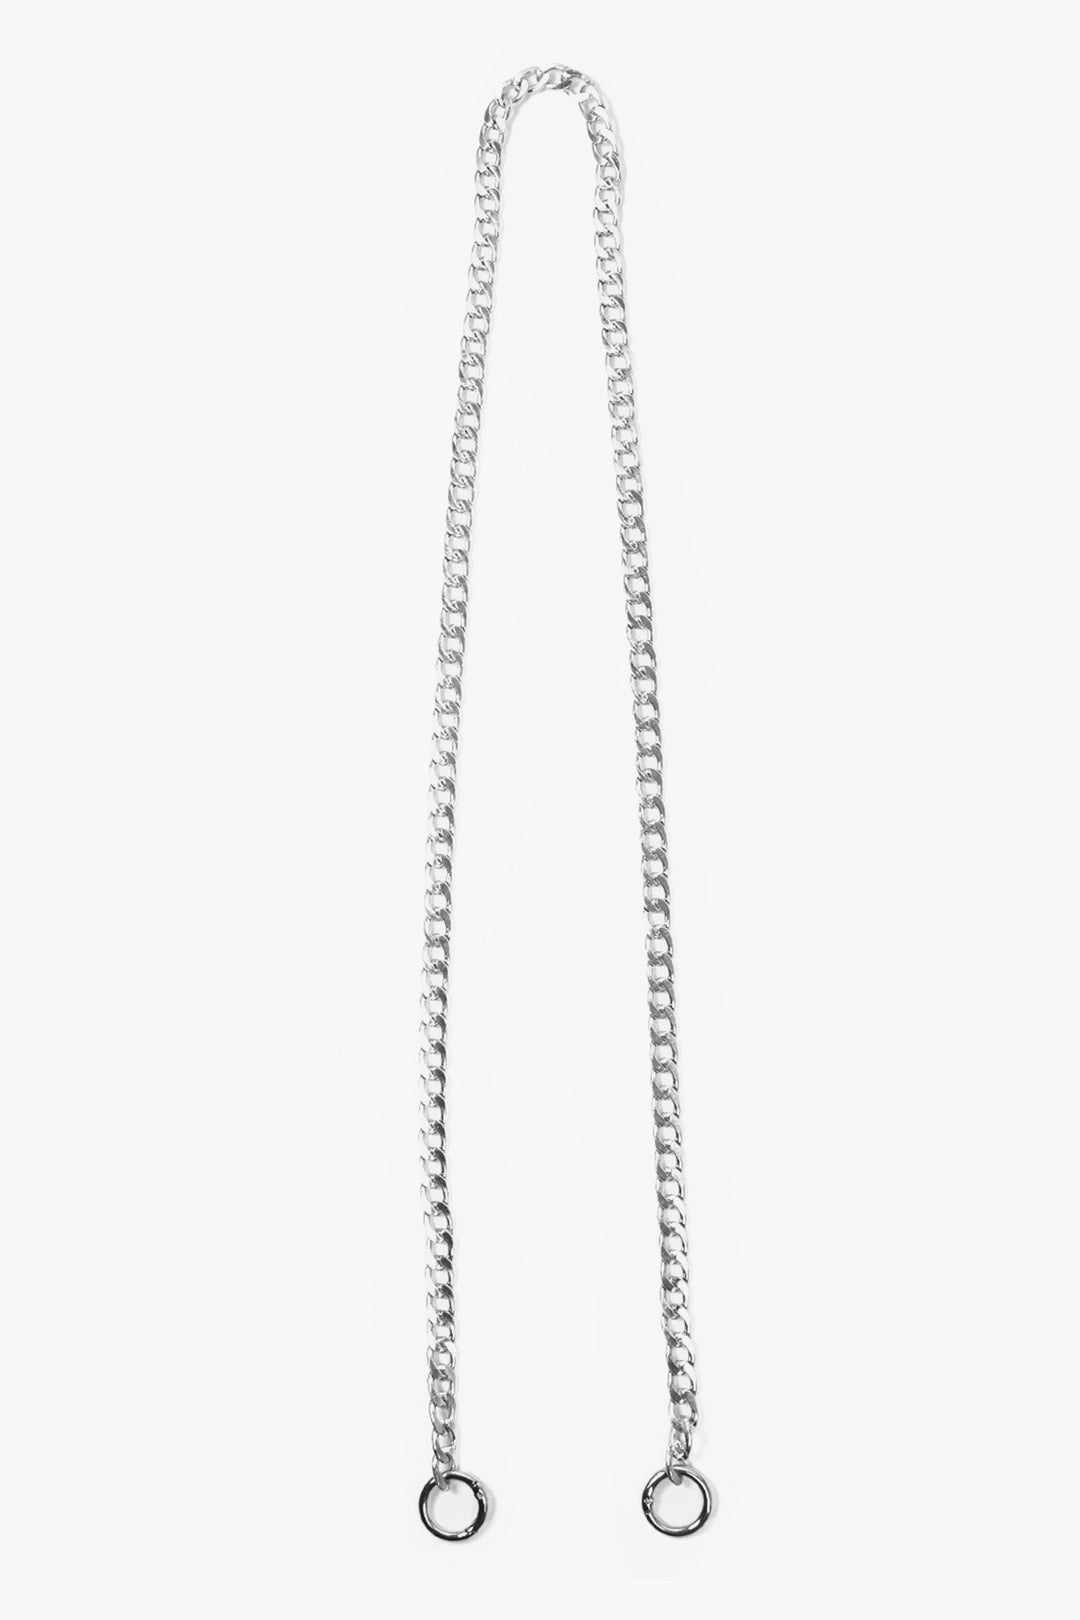 Silver Cuban Style Chain Link Bag Strap